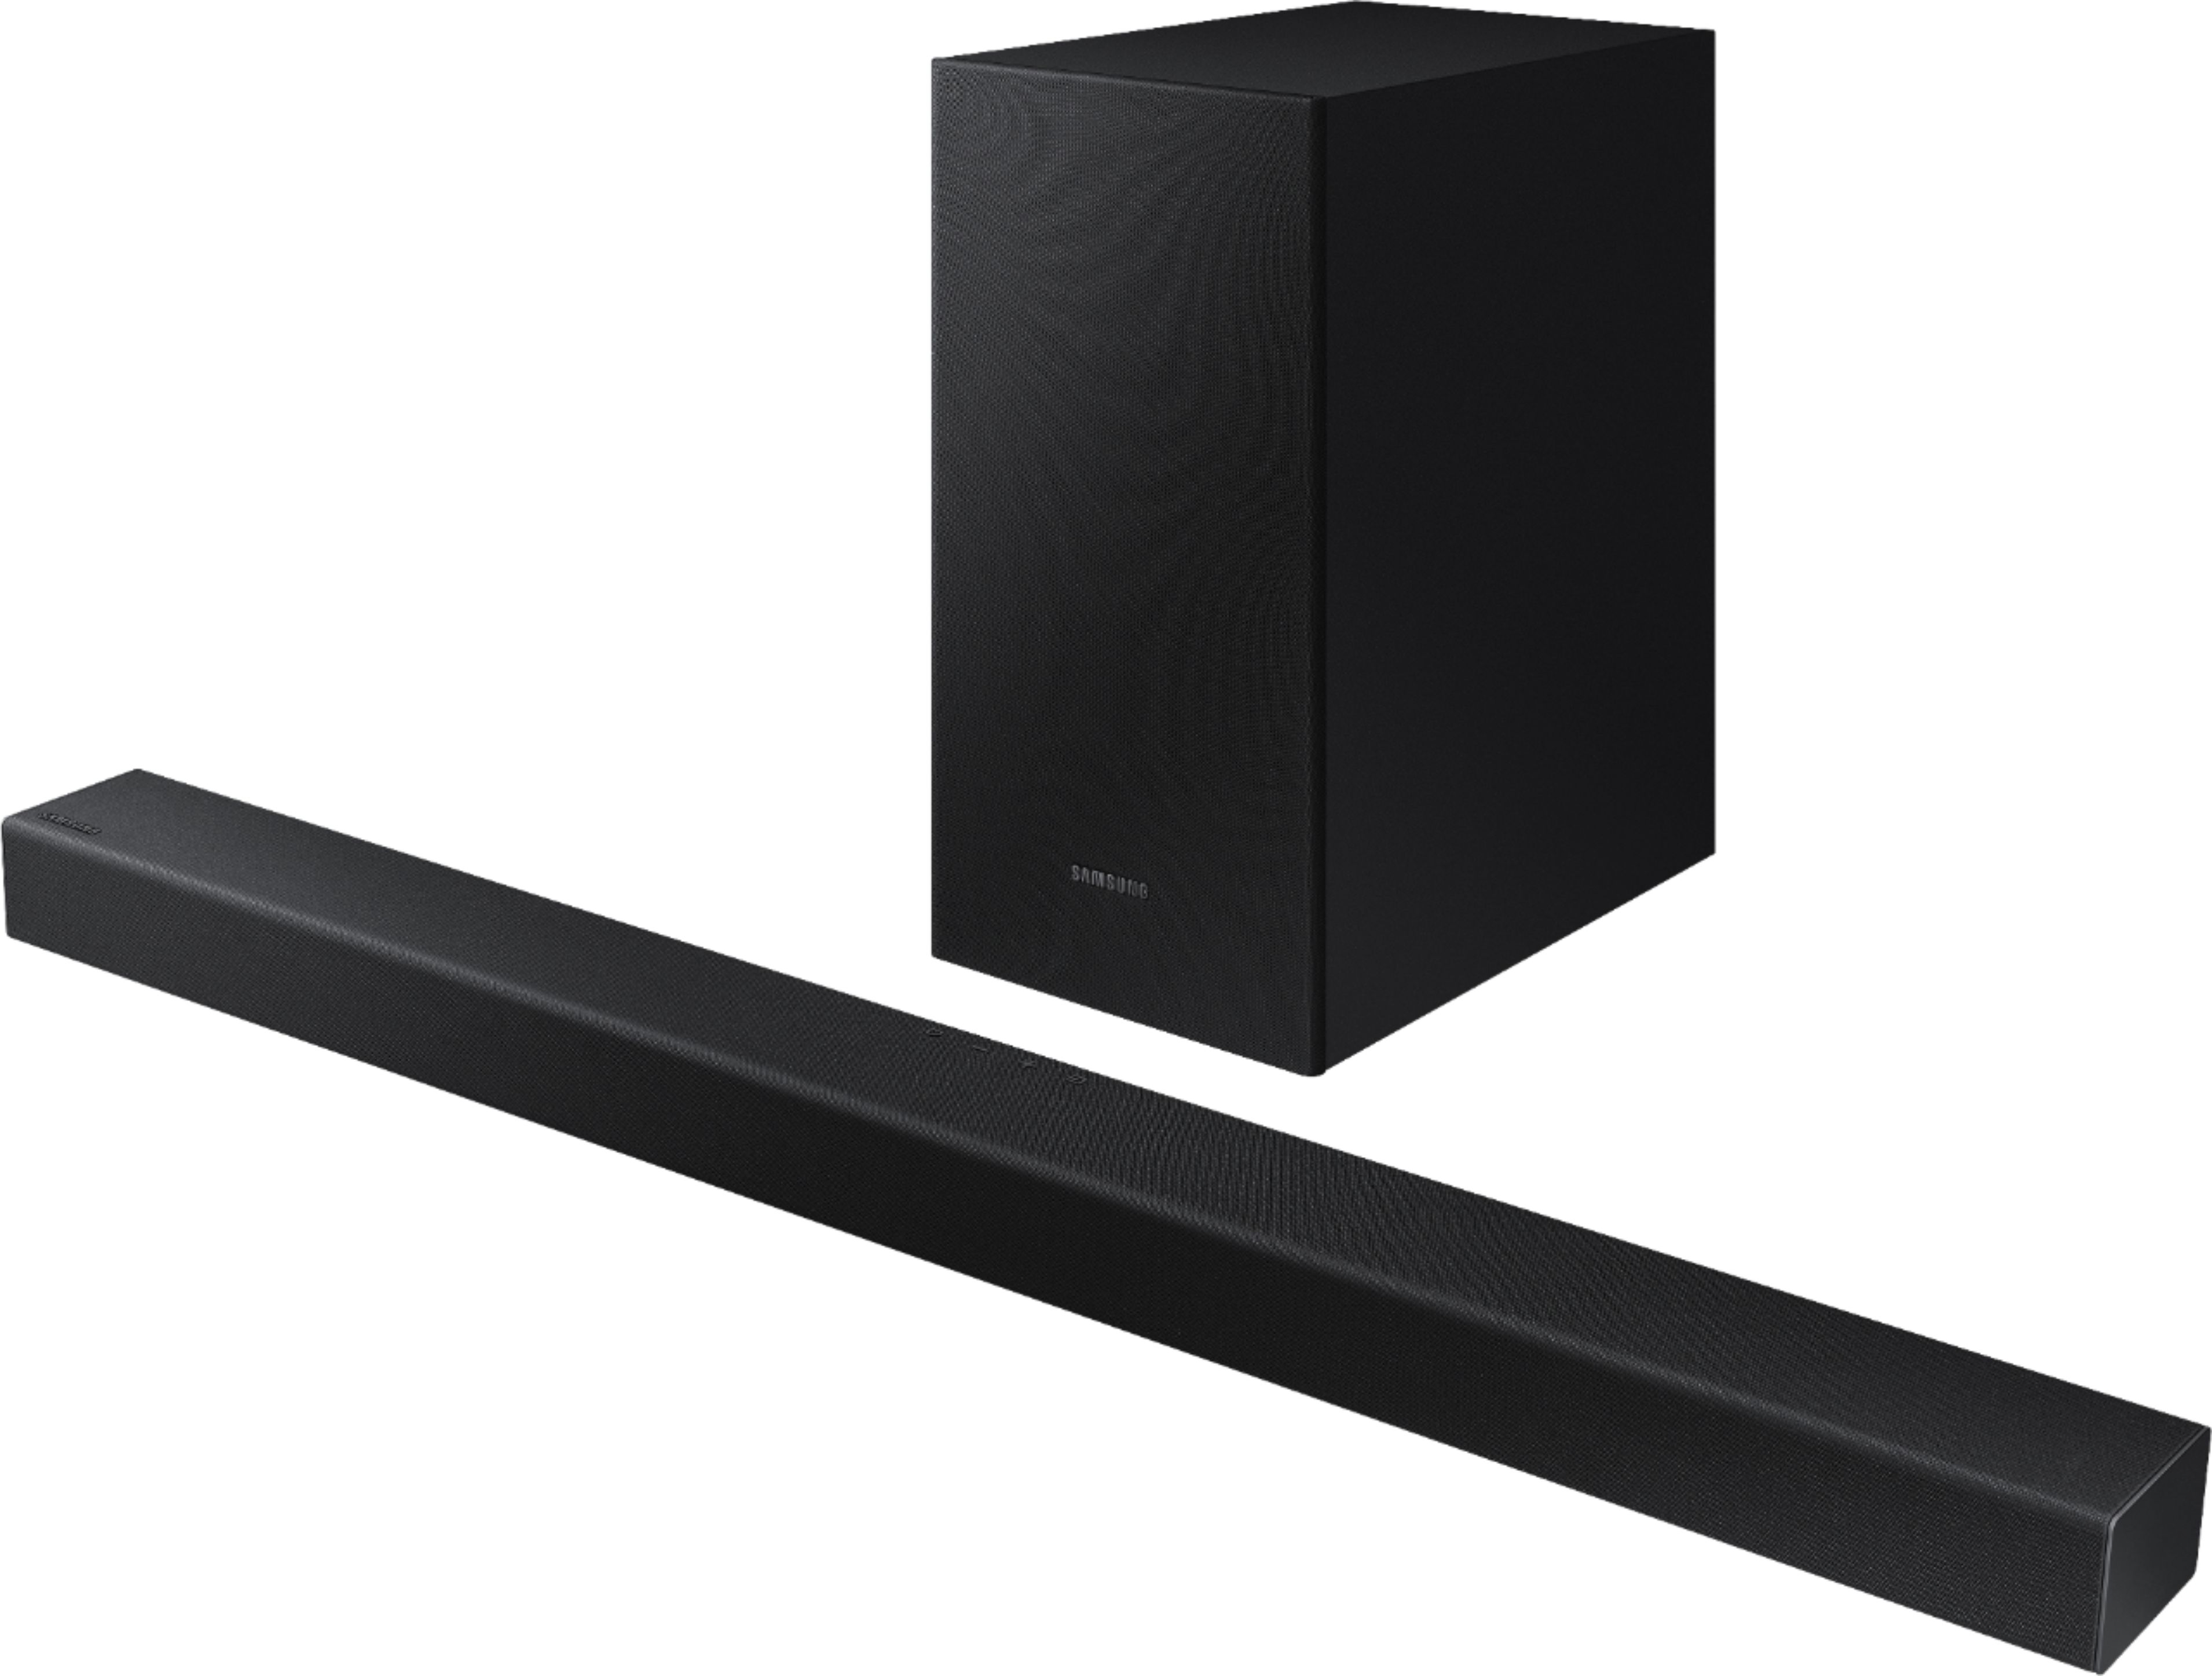 Angle View: Samsung - 2.1-Channel Soundbar with Wireless Subwoofer and Dolby Audio (2020) - Black